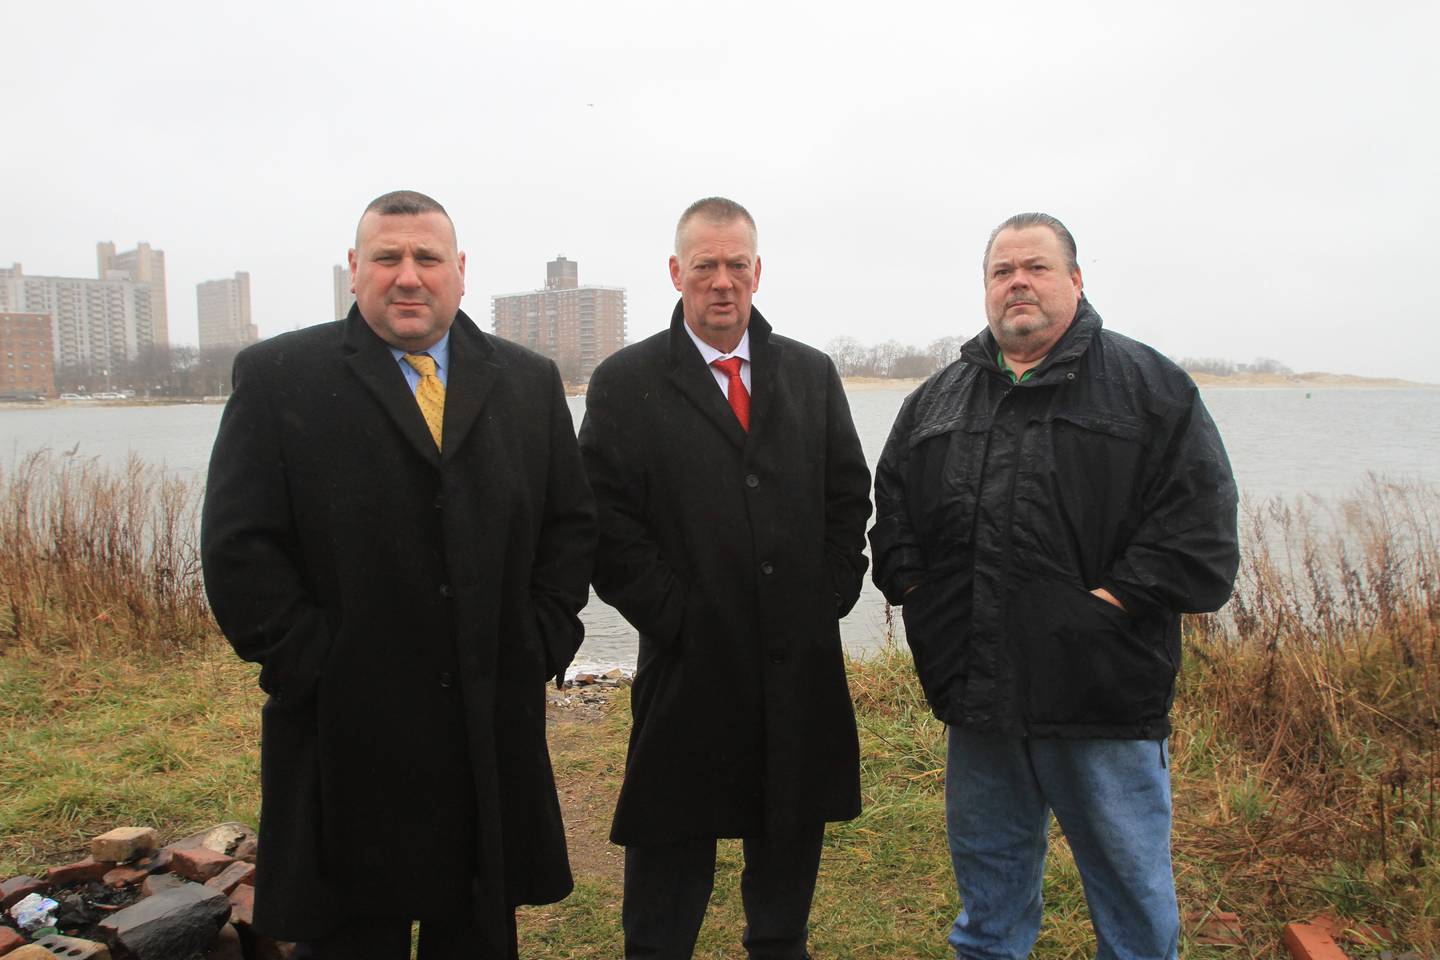 Detectives Mitchell Eisenberg, Timothy O'Brien, and retired Deputy Chief Patrick Conry, at the scene in Calvert Vaux Park near the Coney Island inlet, where the severed remains of an unknown woman were recovered in January of 2015. 